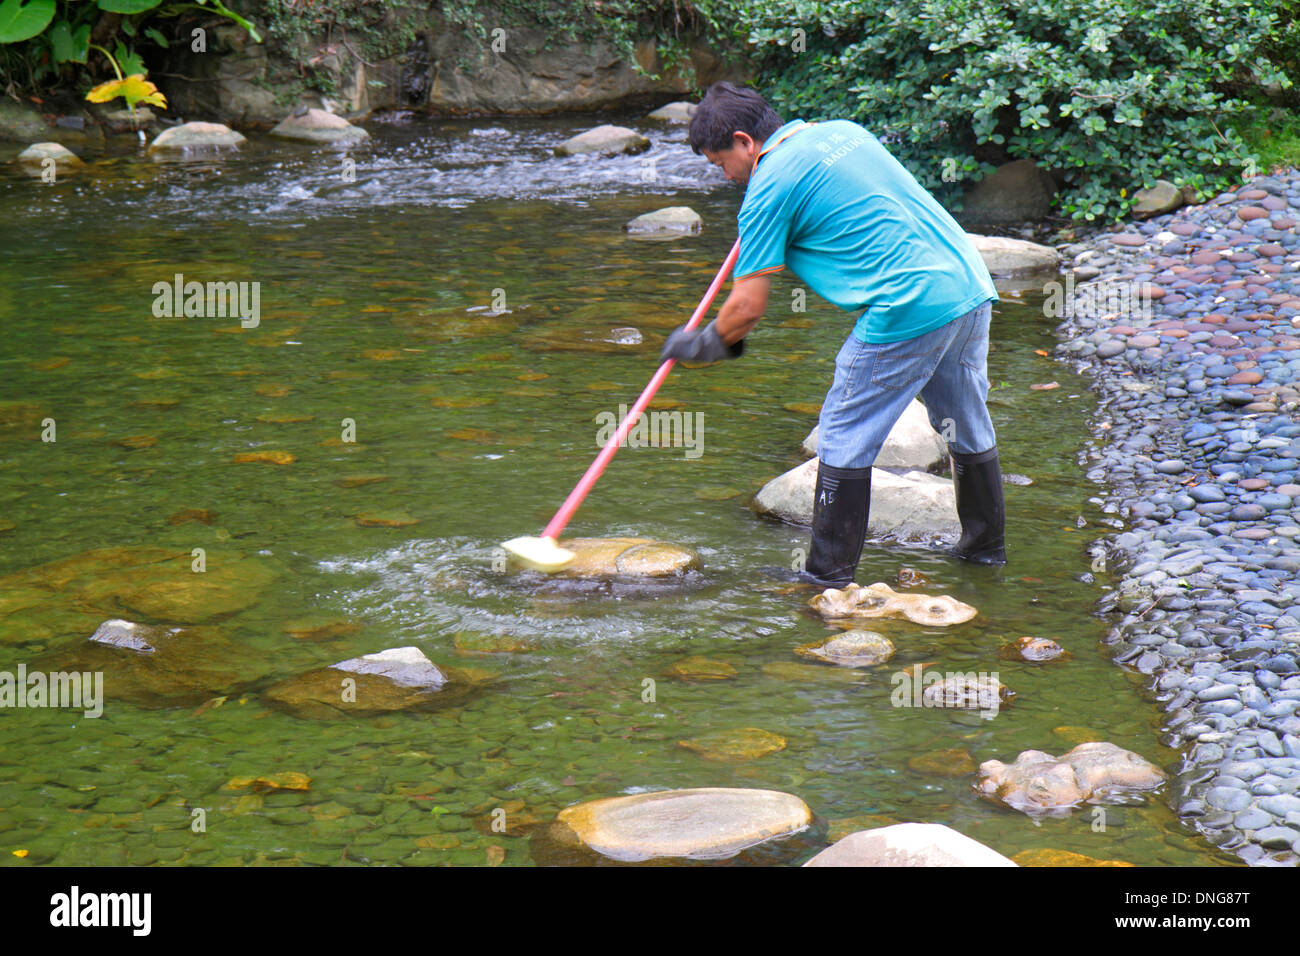 Hong Kong China,HK,Asia,Chinese,Oriental,Island,Central,Hong Kong Park,Asian man men male,employee worker workers working staff,cleaning,scrubbing,alg Stock Photo